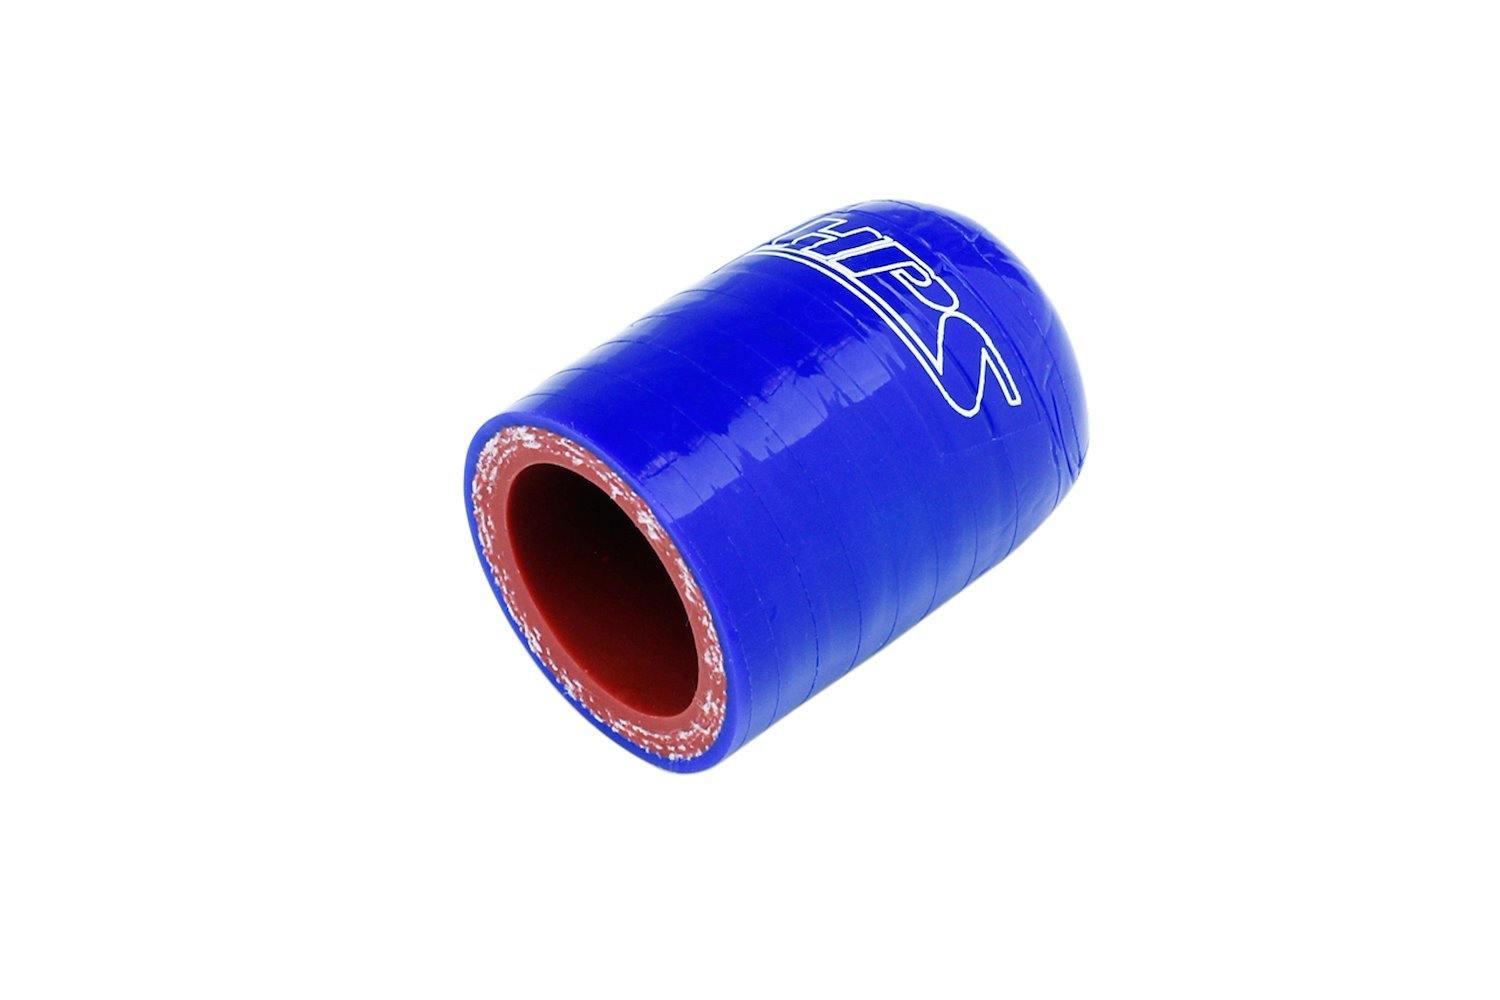 RSCC-087-BLUE Coolant Bypass Cap, 3-Ply Reinforced High-Temp. Silicone Bypass Cap, 7/8 in. ID, Blue